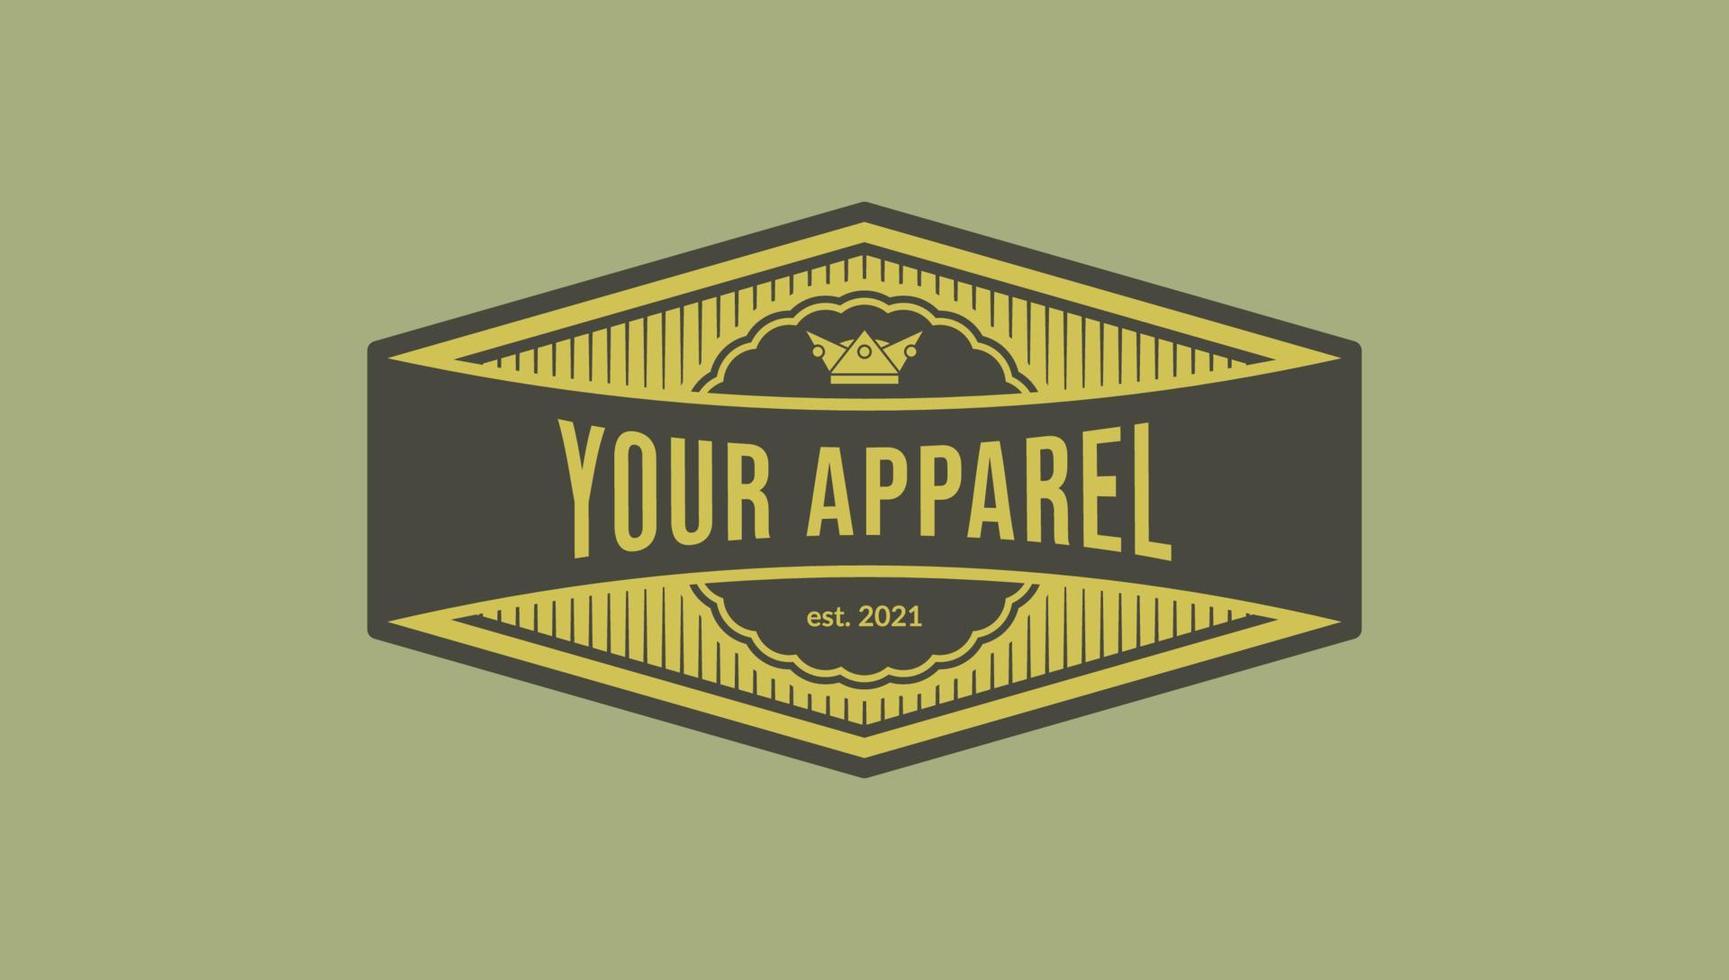 vintage emblem logo, hang tag, sticker for your apparel and creative merchandise vector